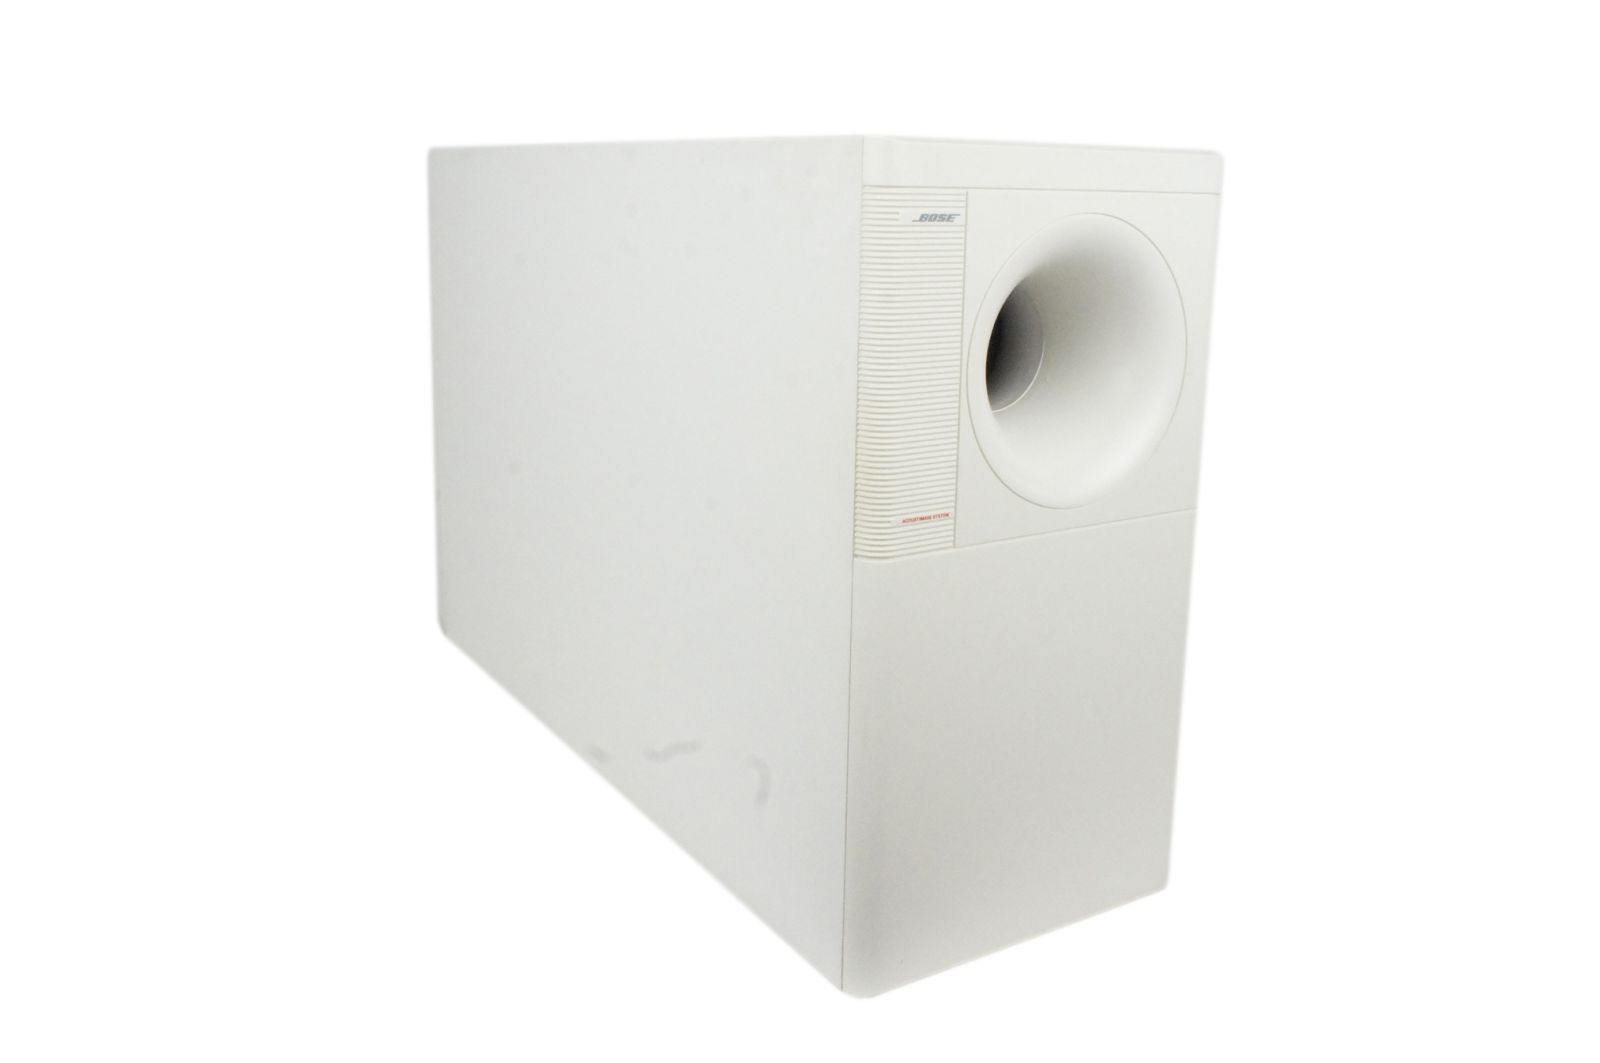 Bose_Acoustimass_10_5.1_Subwoofer_Weiss_inkl_02